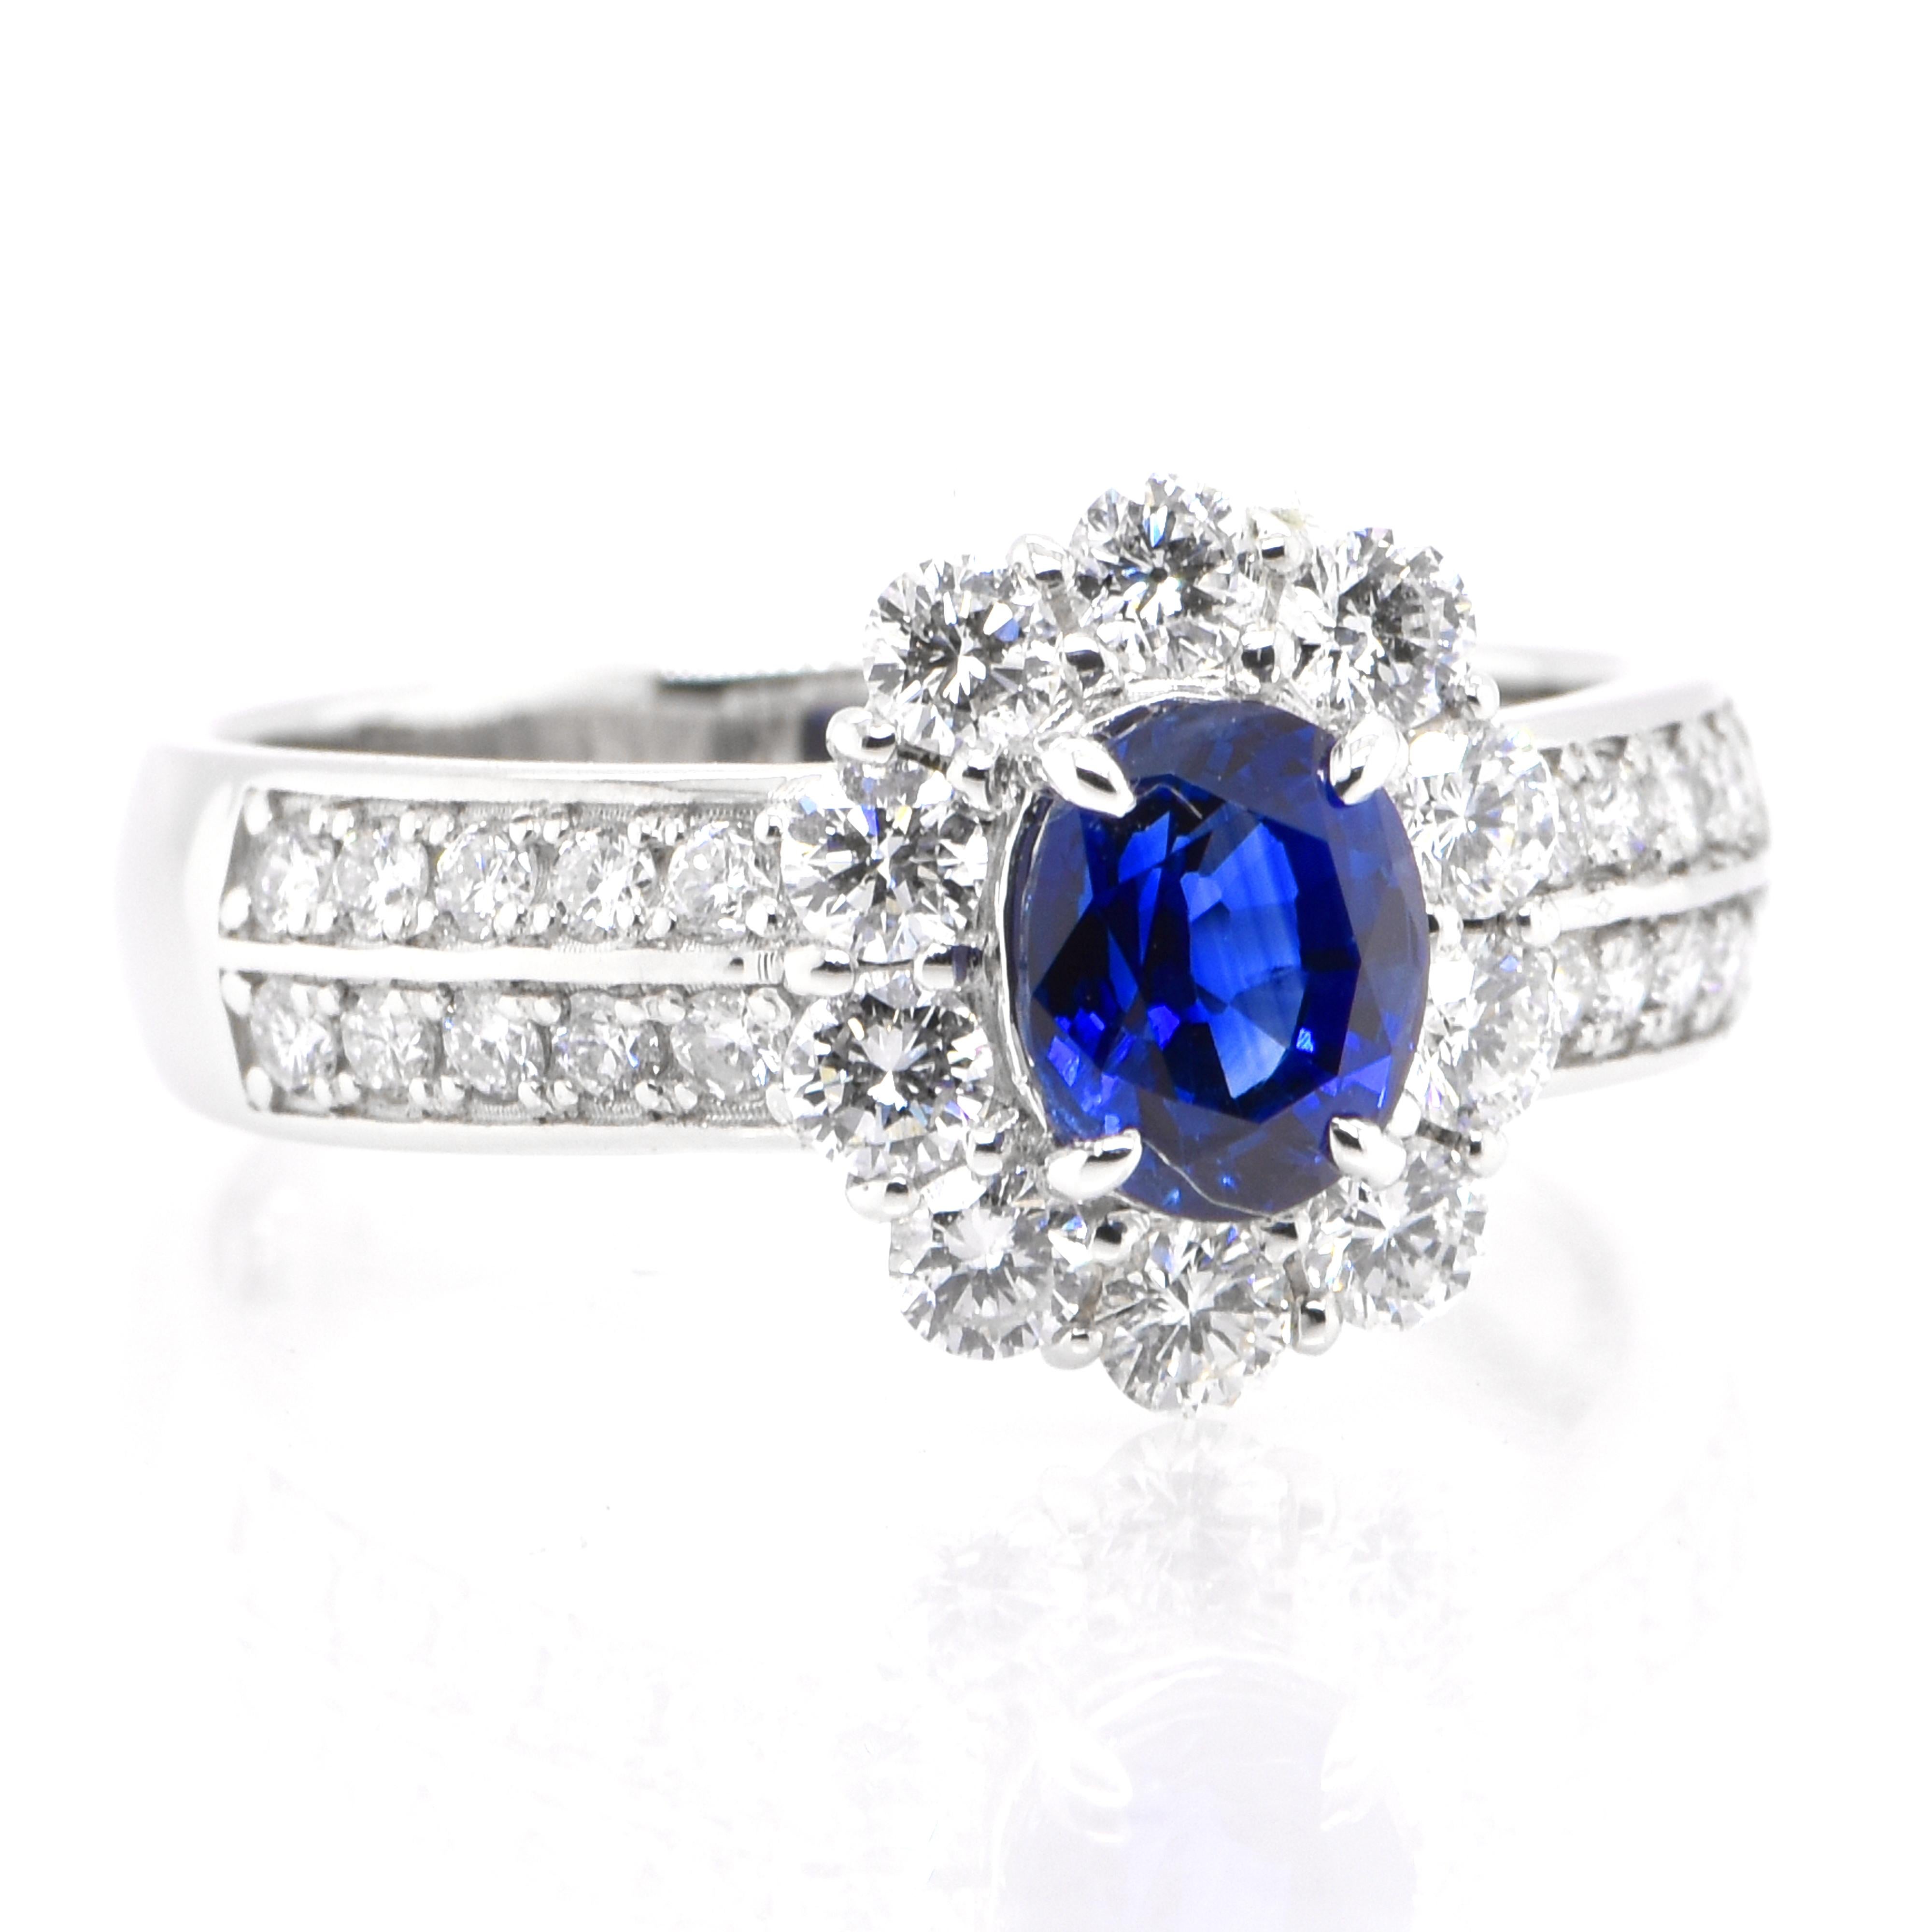 Modern 1.26 Carat Natural Blue Sapphire and Diamond Halo Ring Set in Platinum For Sale